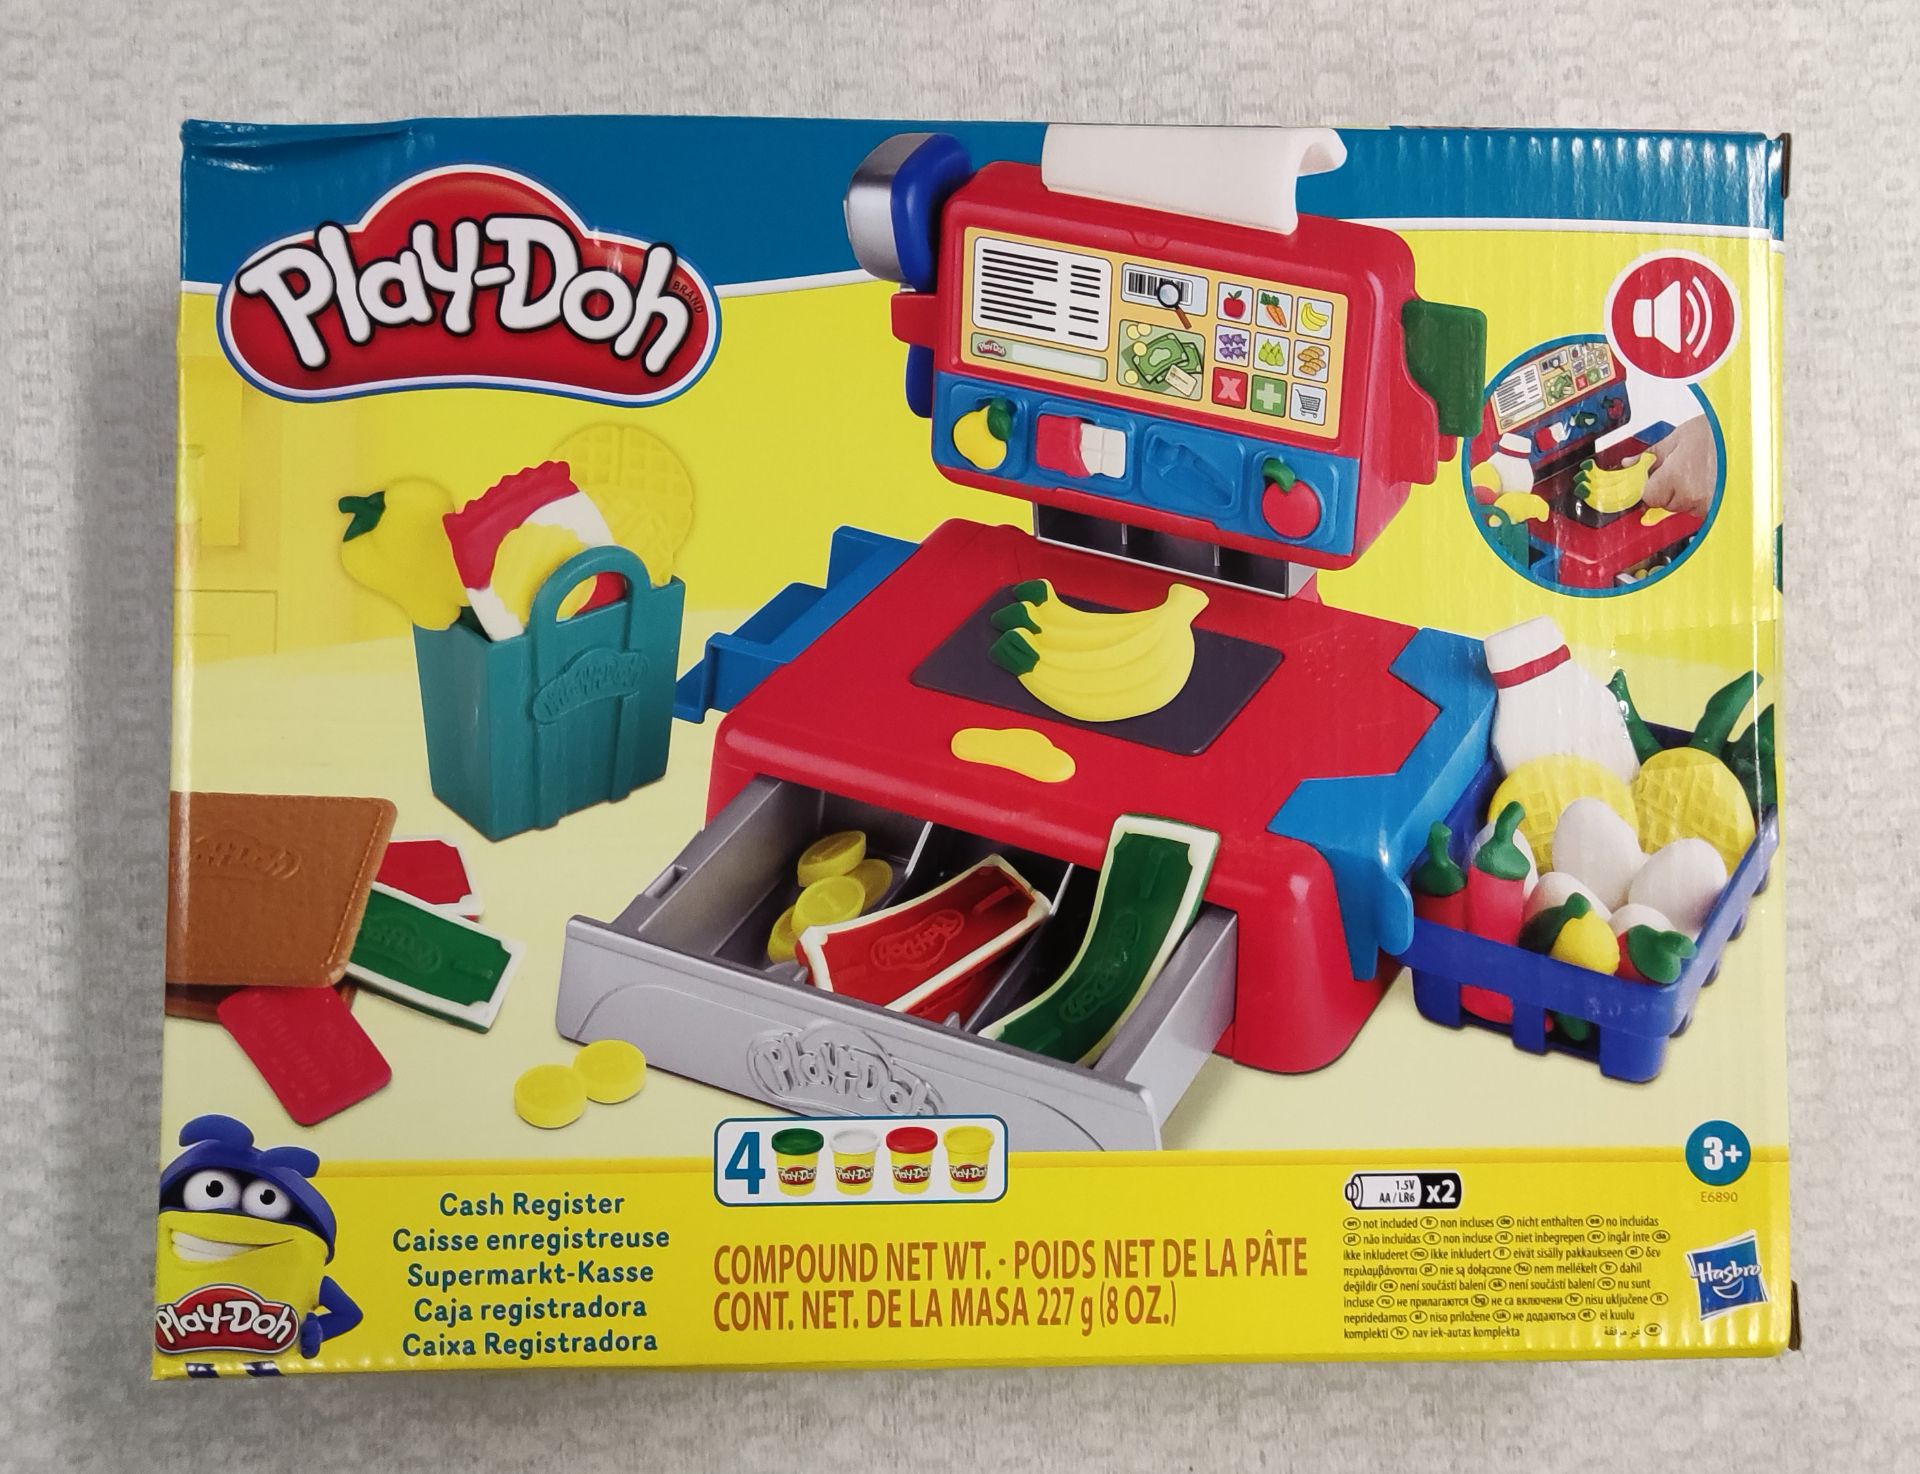 1 x Play-Doh Cash Register - New/Boxed - Image 2 of 7